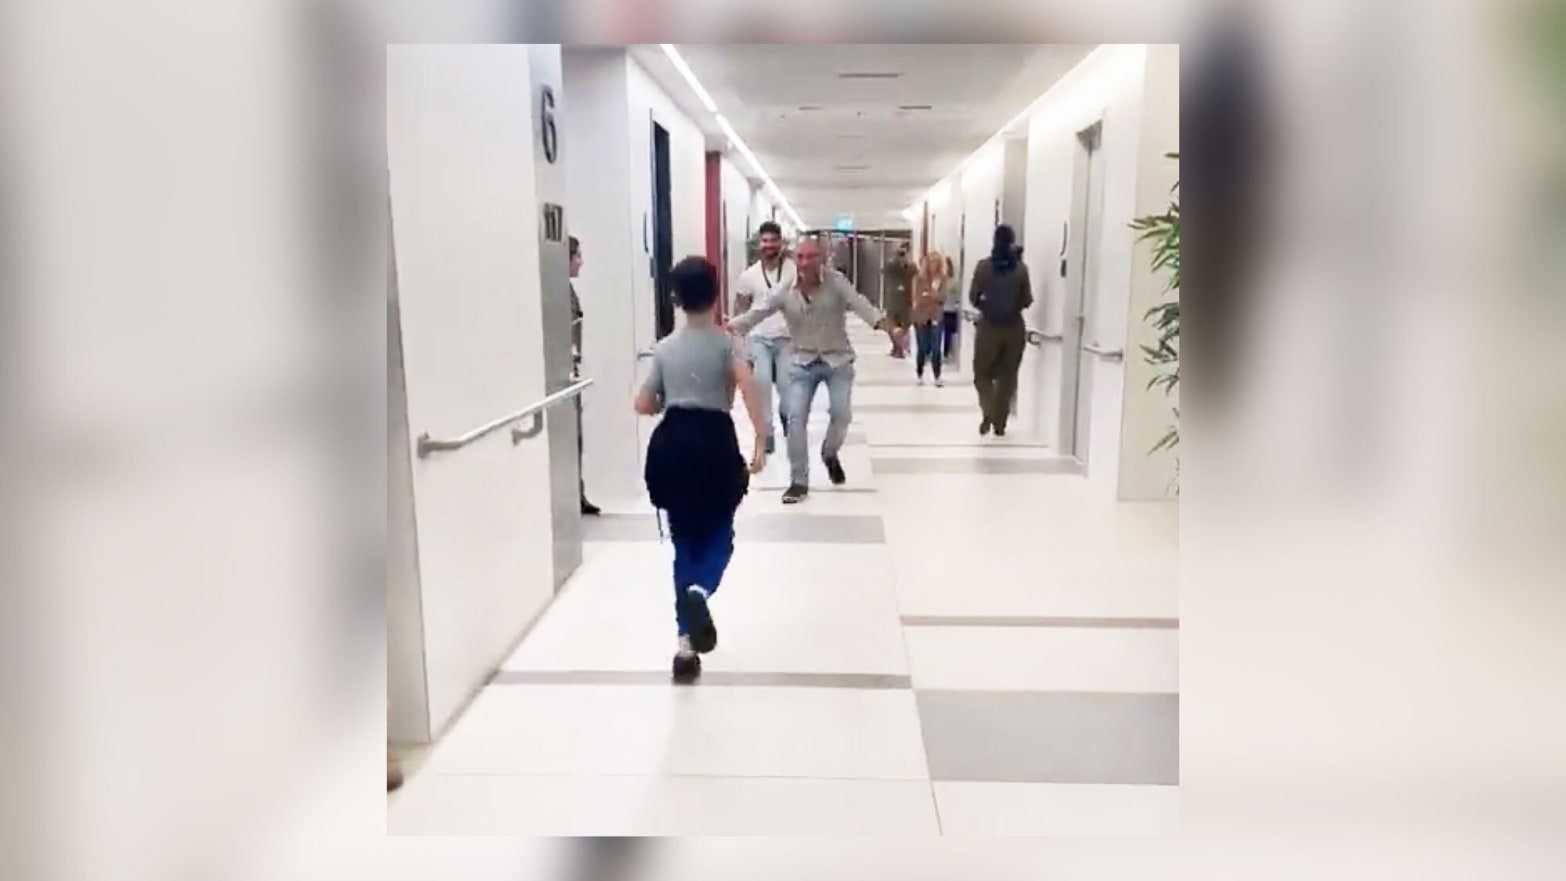 Ohad Munder runs down a hall to meet his father after being released as part of a prisoner exchange.